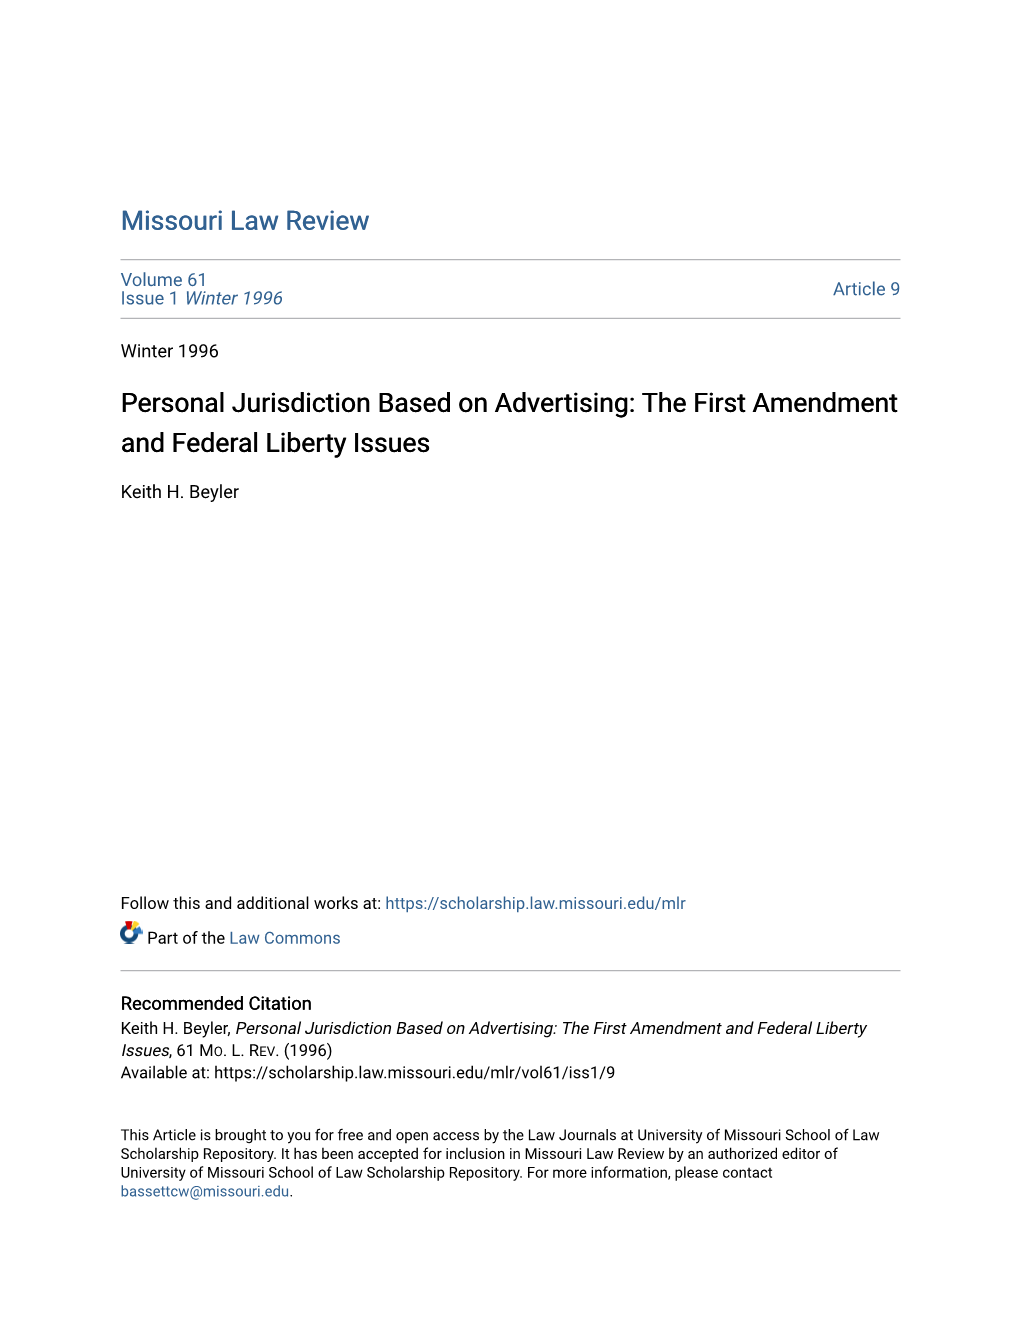 Personal Jurisdiction Based on Advertising: the First Amendment and Federal Liberty Issues